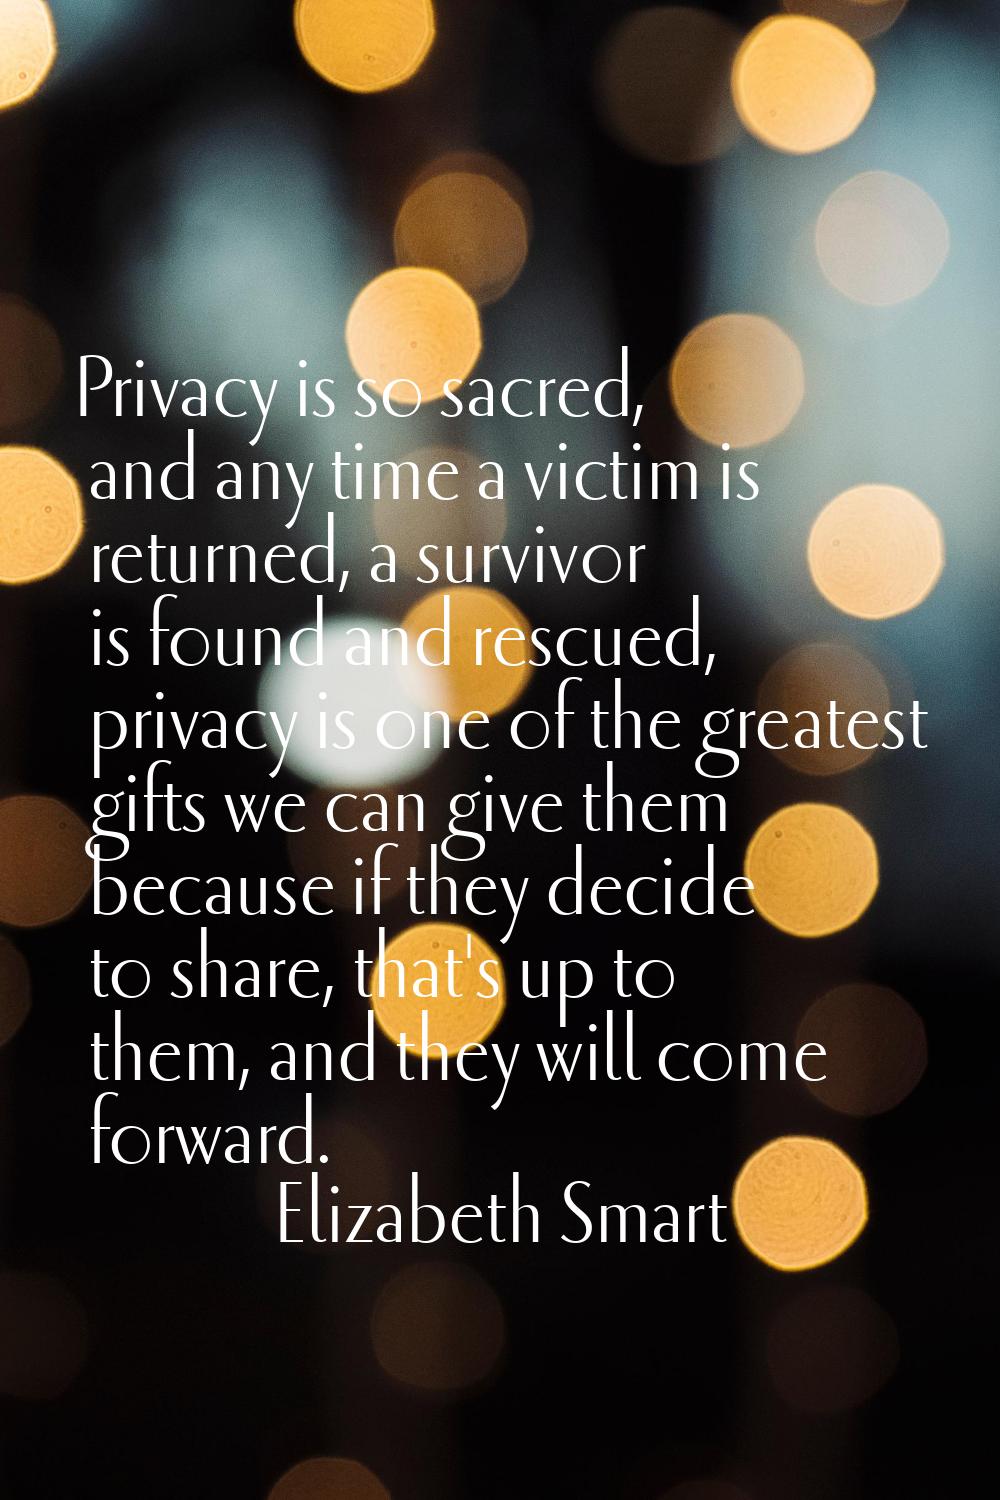 Privacy is so sacred, and any time a victim is returned, a survivor is found and rescued, privacy i